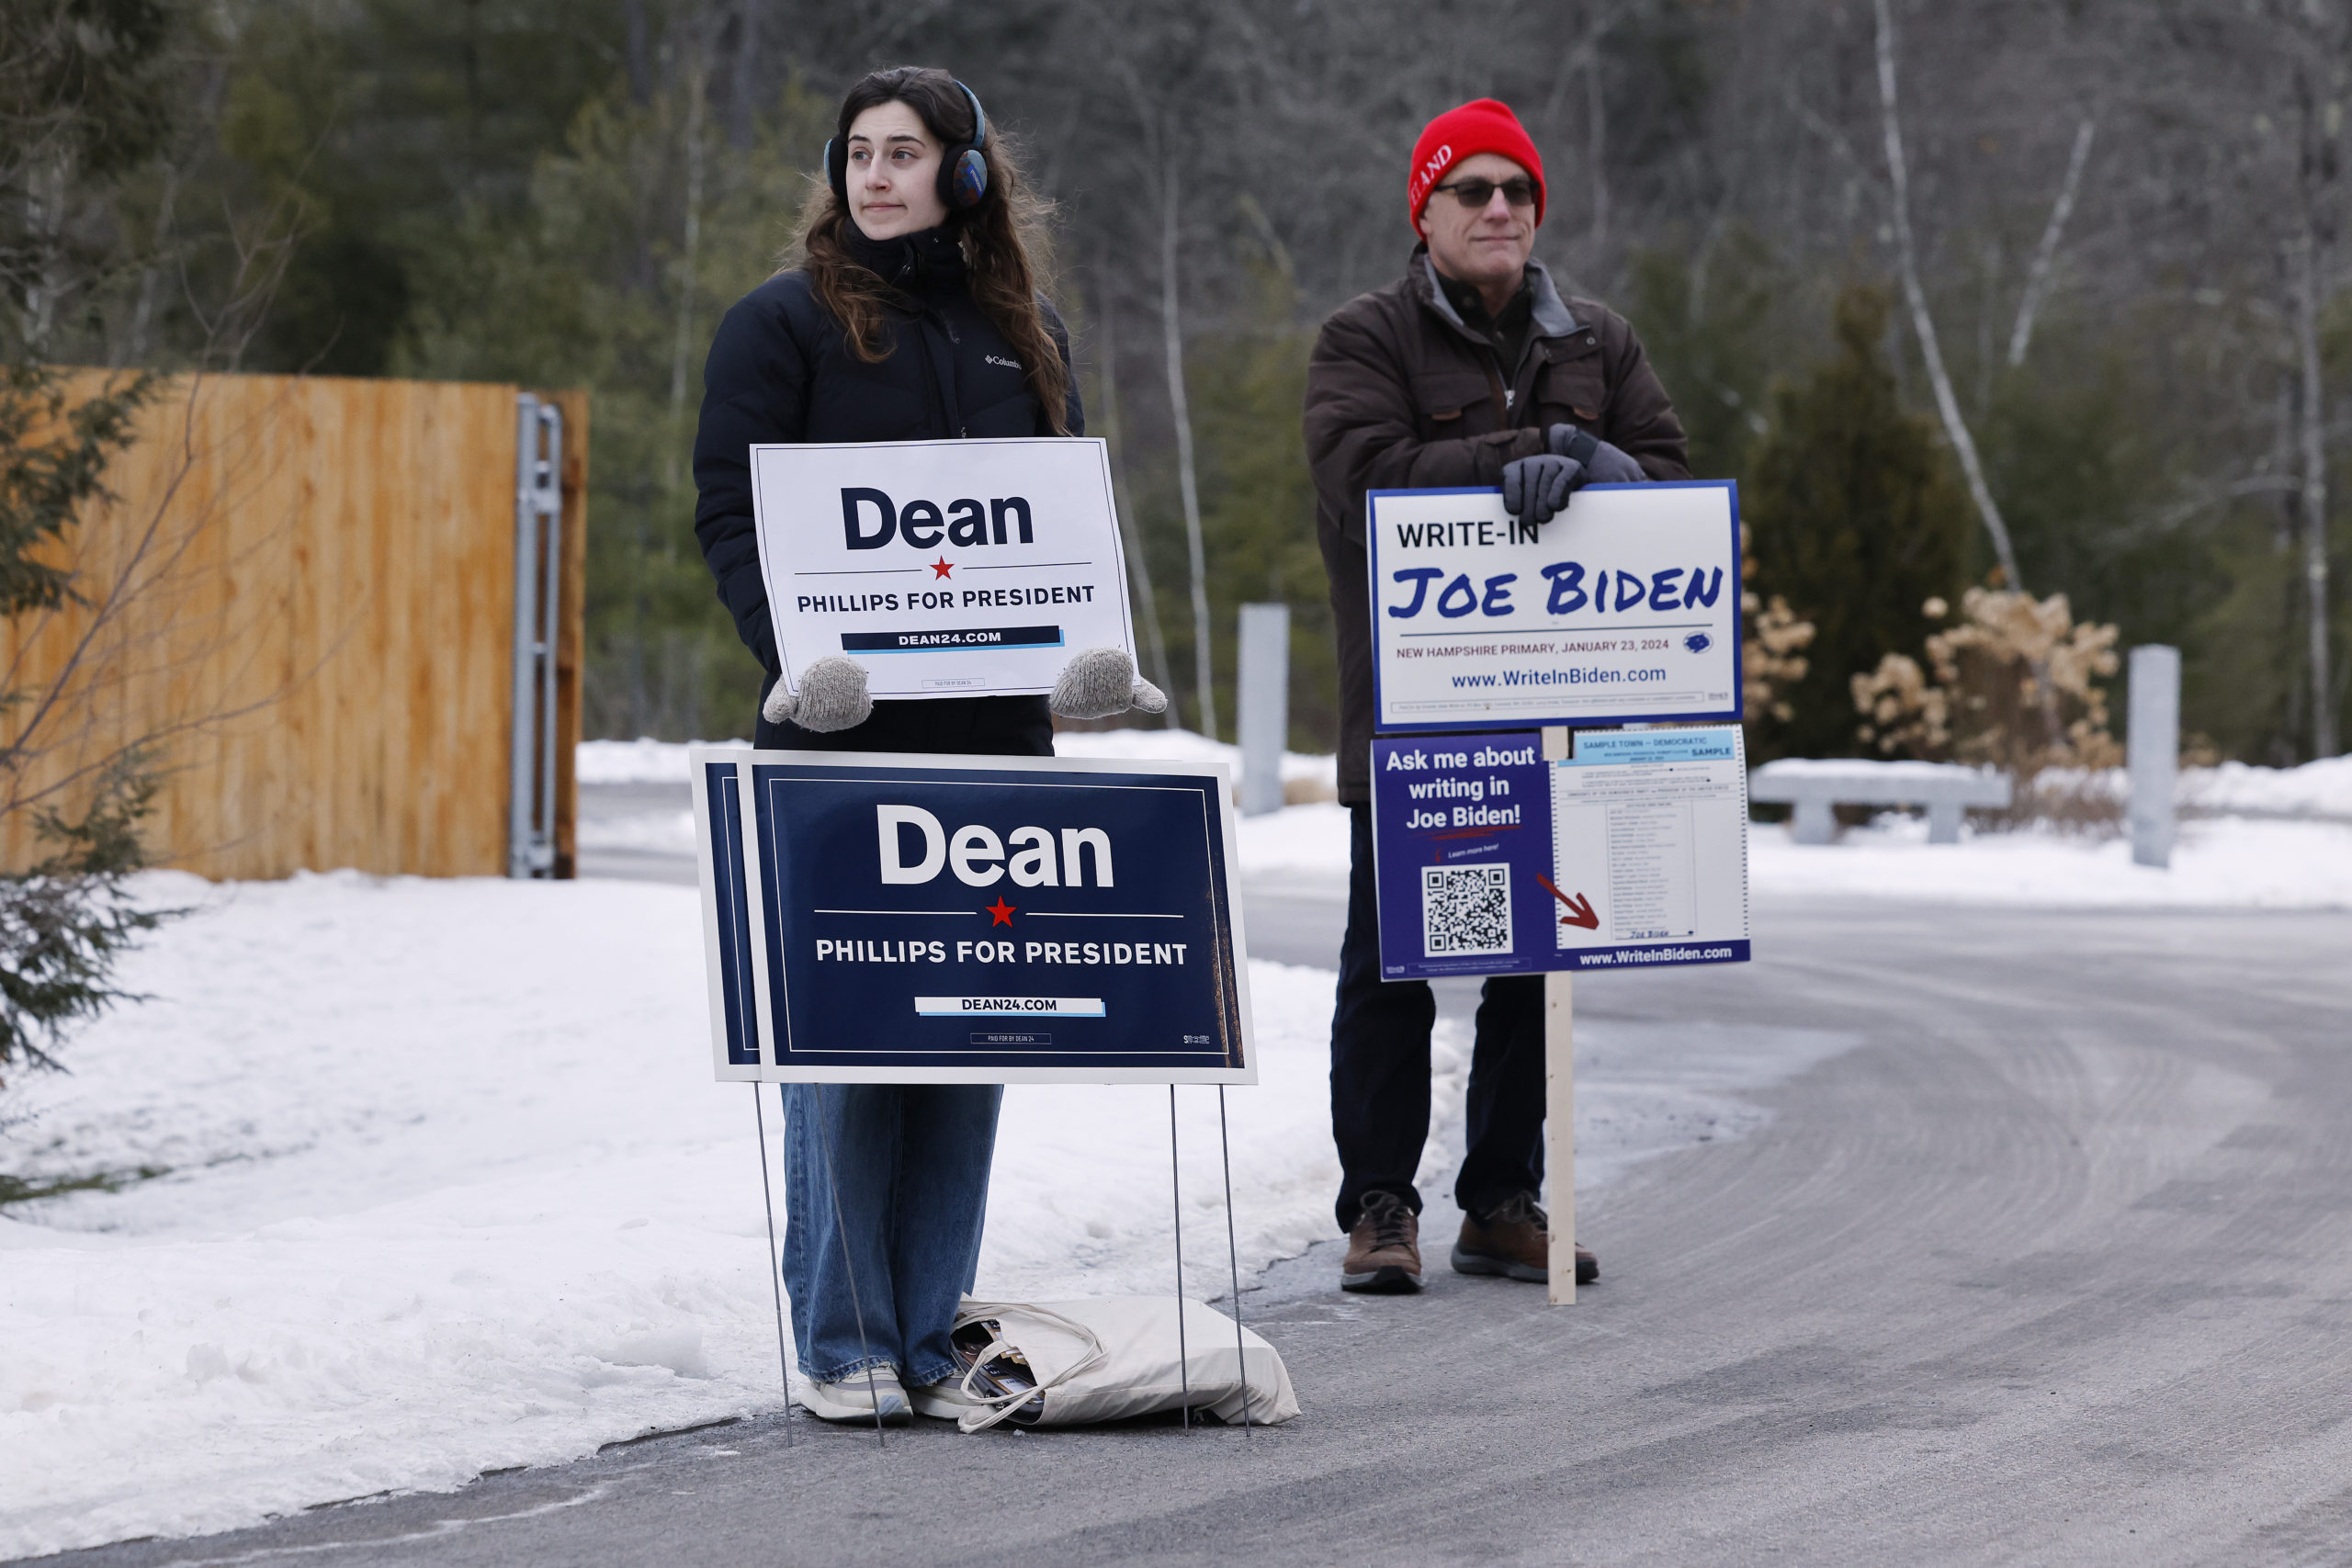 CONCORD, NEW HAMPSHIRE - JANUARY 23: Mae Hougo (L), a volunteer for U.S. Rep. Dean Phillips (D-MN), and Chuck Willing, a volunteer with the President Joe Biden write-in campaign, stand outside the polling place at The Barn at Bull Meadow during the New Hampshire presidential primary on January 23, 2024 in Concord, New Hampshire. With Florida Governor Ron DeSantis dropping out of the race two days earlier, Republican presidential candidates former President Donald Trump and former UN Ambassador and former South Carolina Governor Nikki Haley are battling it out in this first-in-the-nation primary. (Photo by Chip Somodevilla/Getty Images)